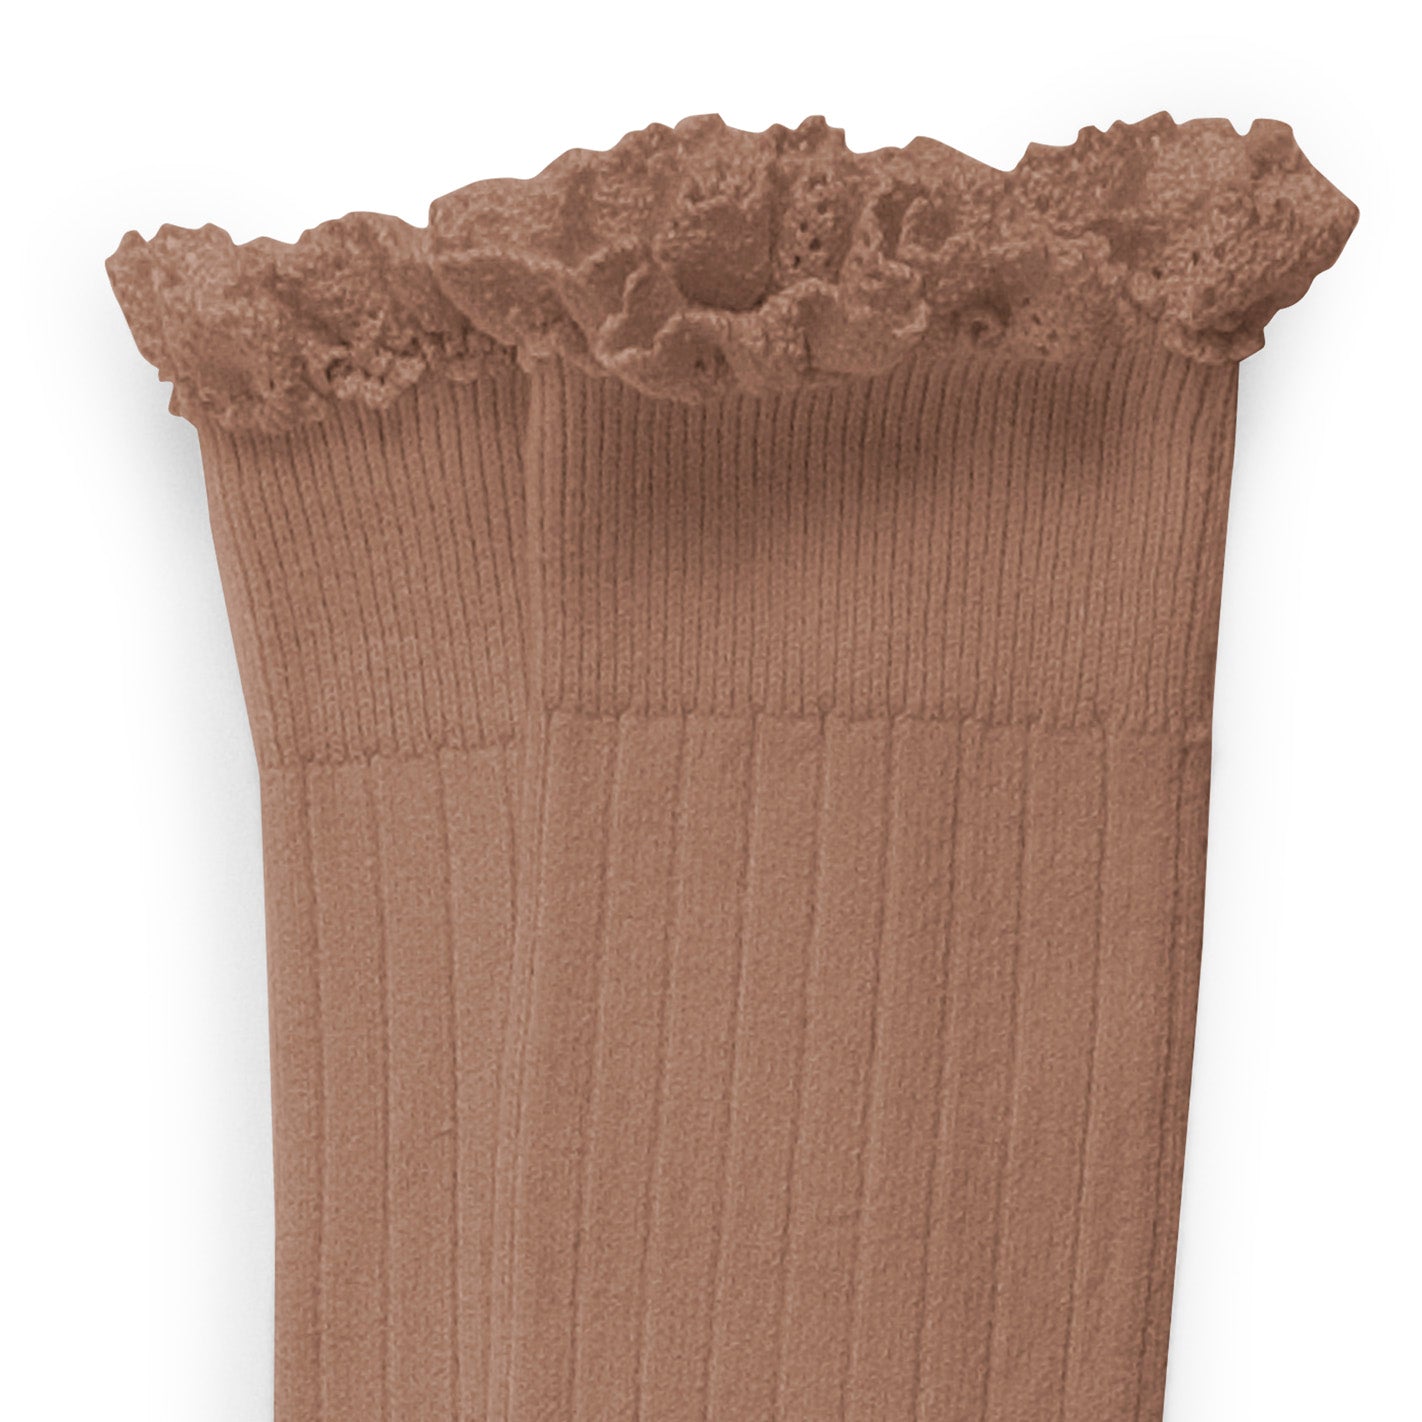 Joséphine Petite Taupe - Knee Socks with Lace